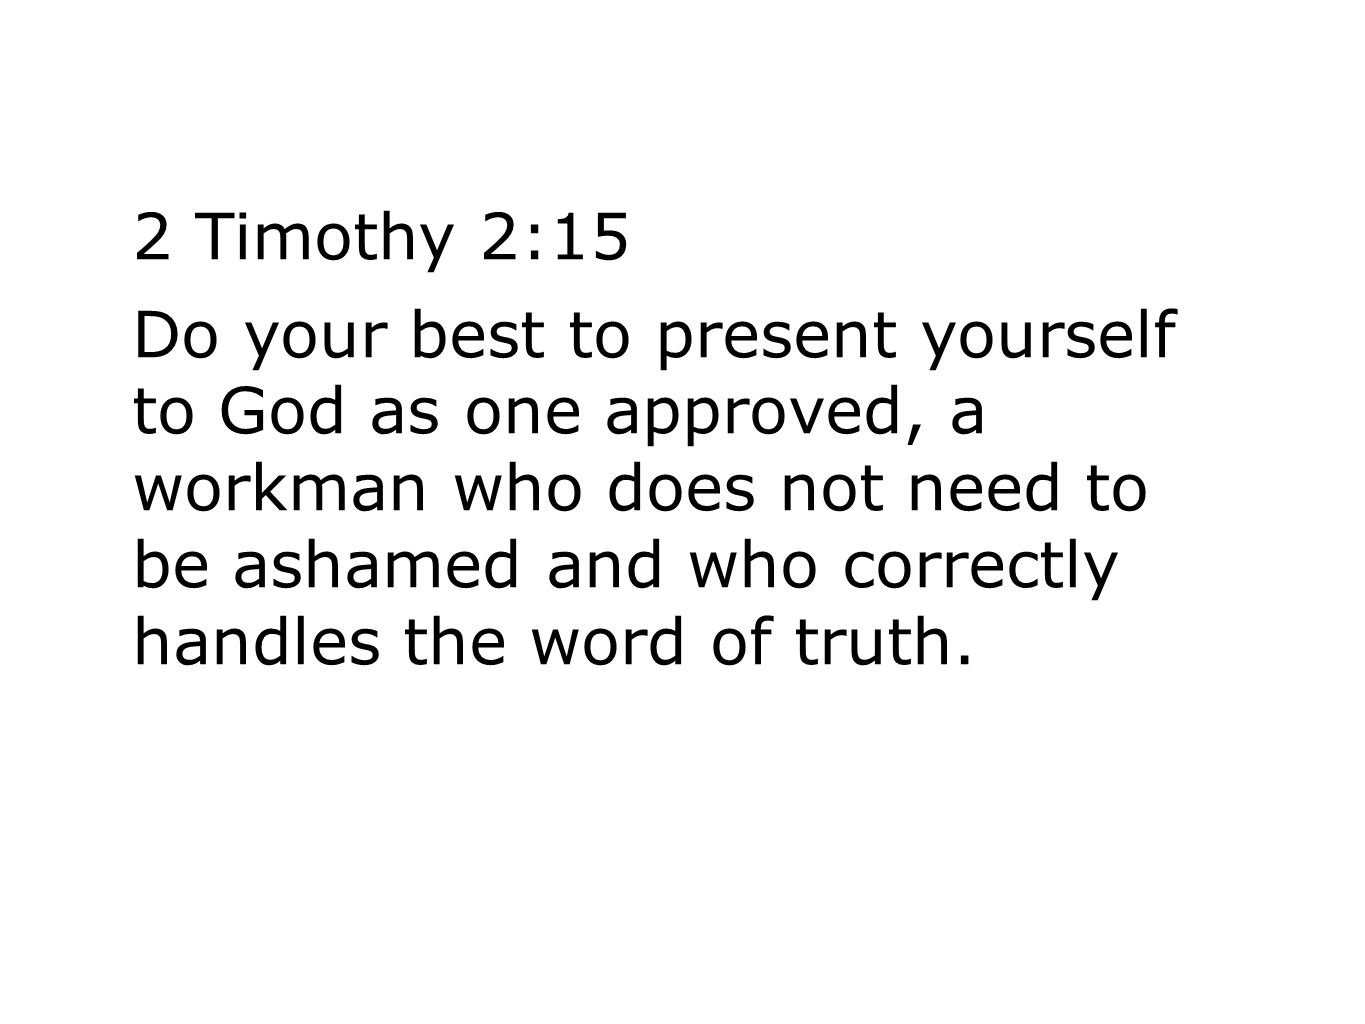 2 Timothy 2:15 Do your best to present yourself to God as one approved, a workman who does not need to be ashamed and who correctly handles the word of truth.